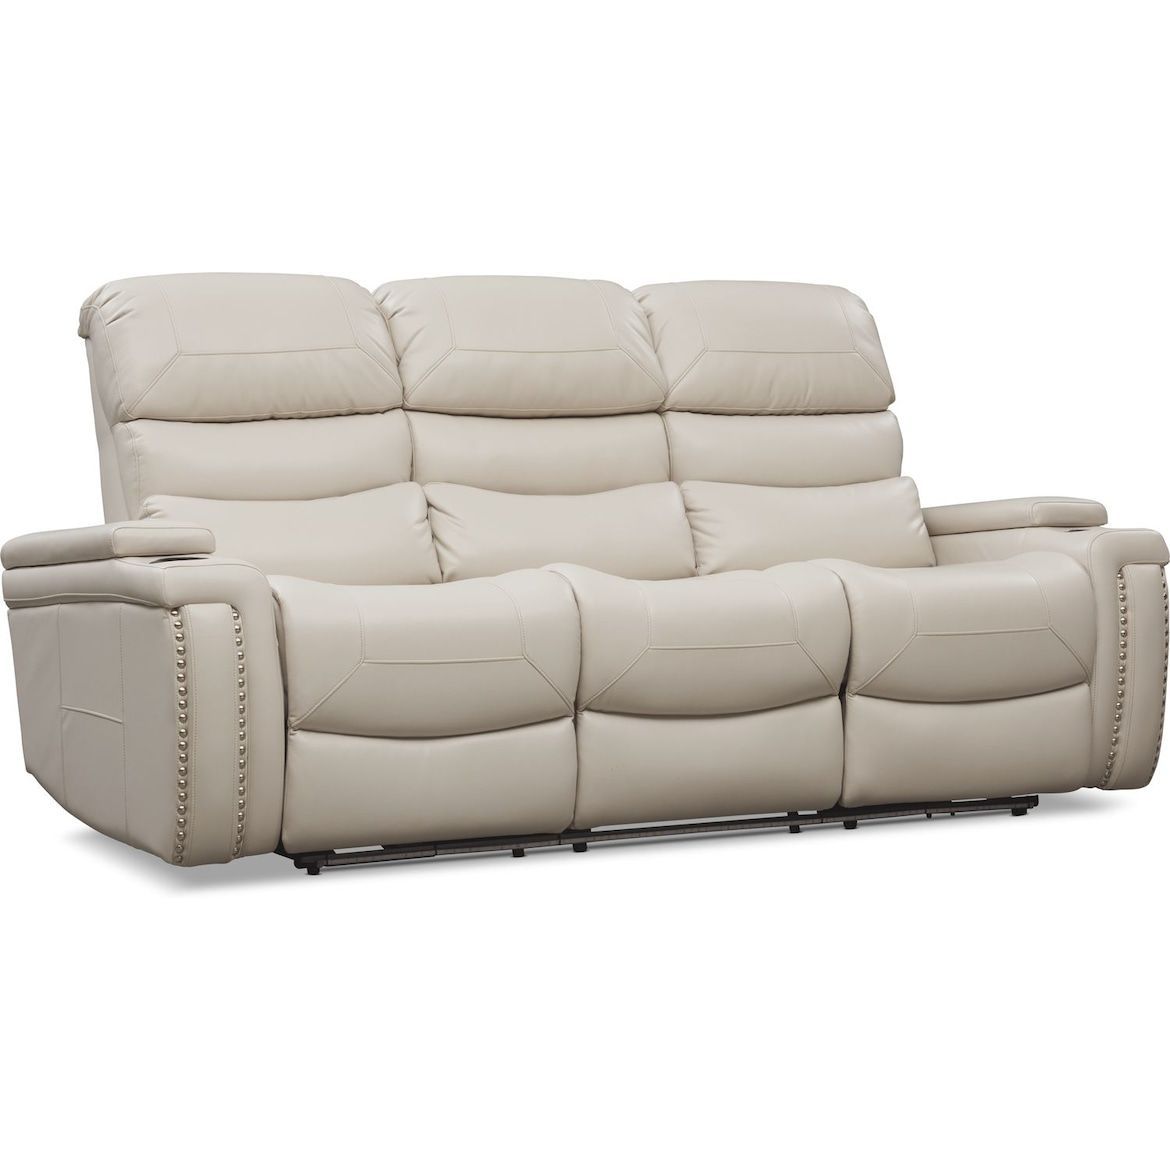 Jackson Triple Power Reclining Sofa And Recliner Set Inside Charleston Triple Power Reclining Sofas (View 3 of 15)